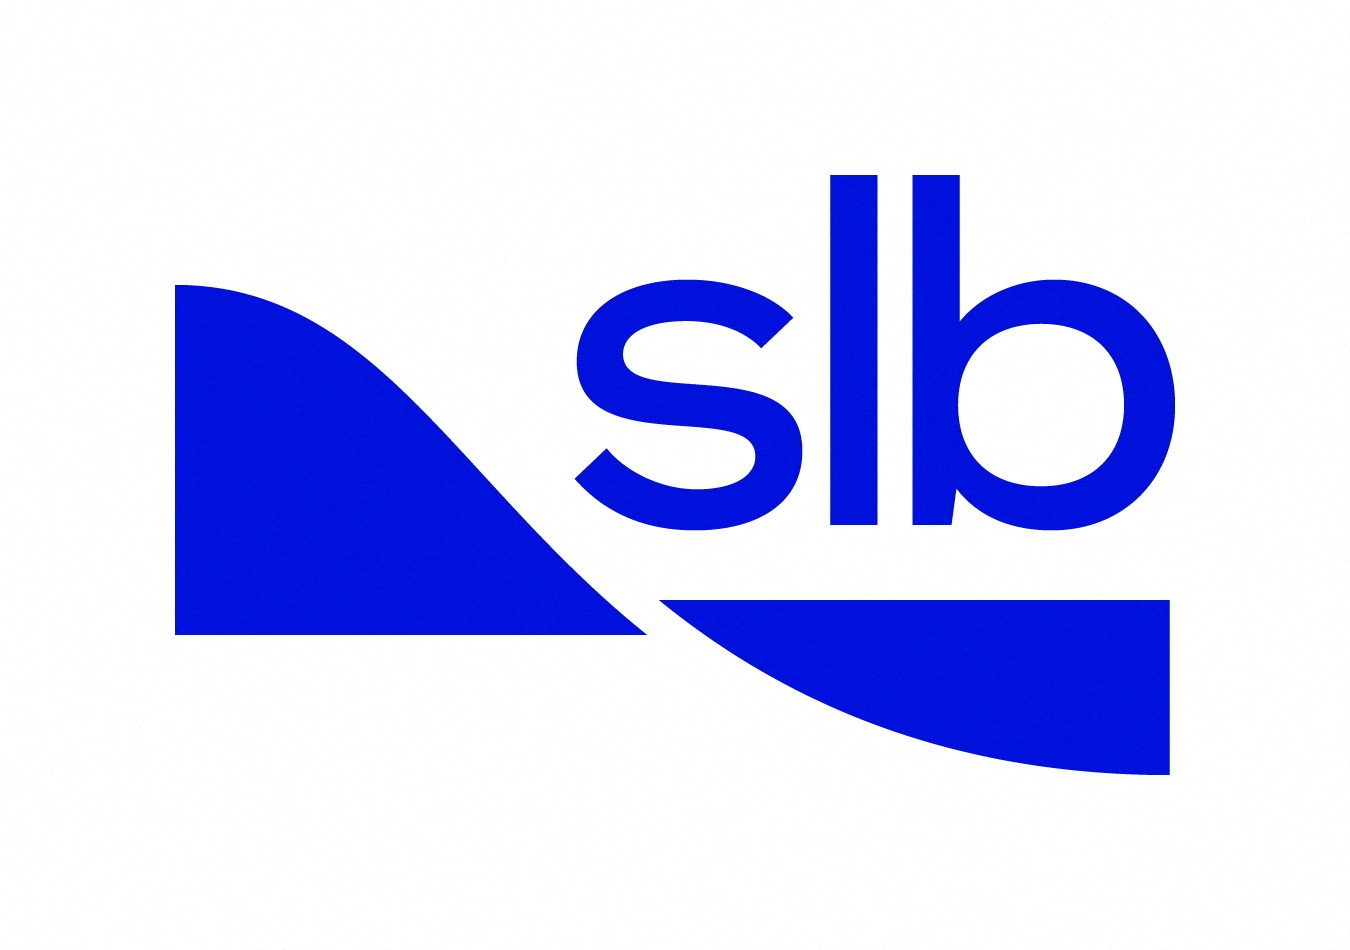 Oil-field firm SLB retrenches as Russia sanctions squeeze